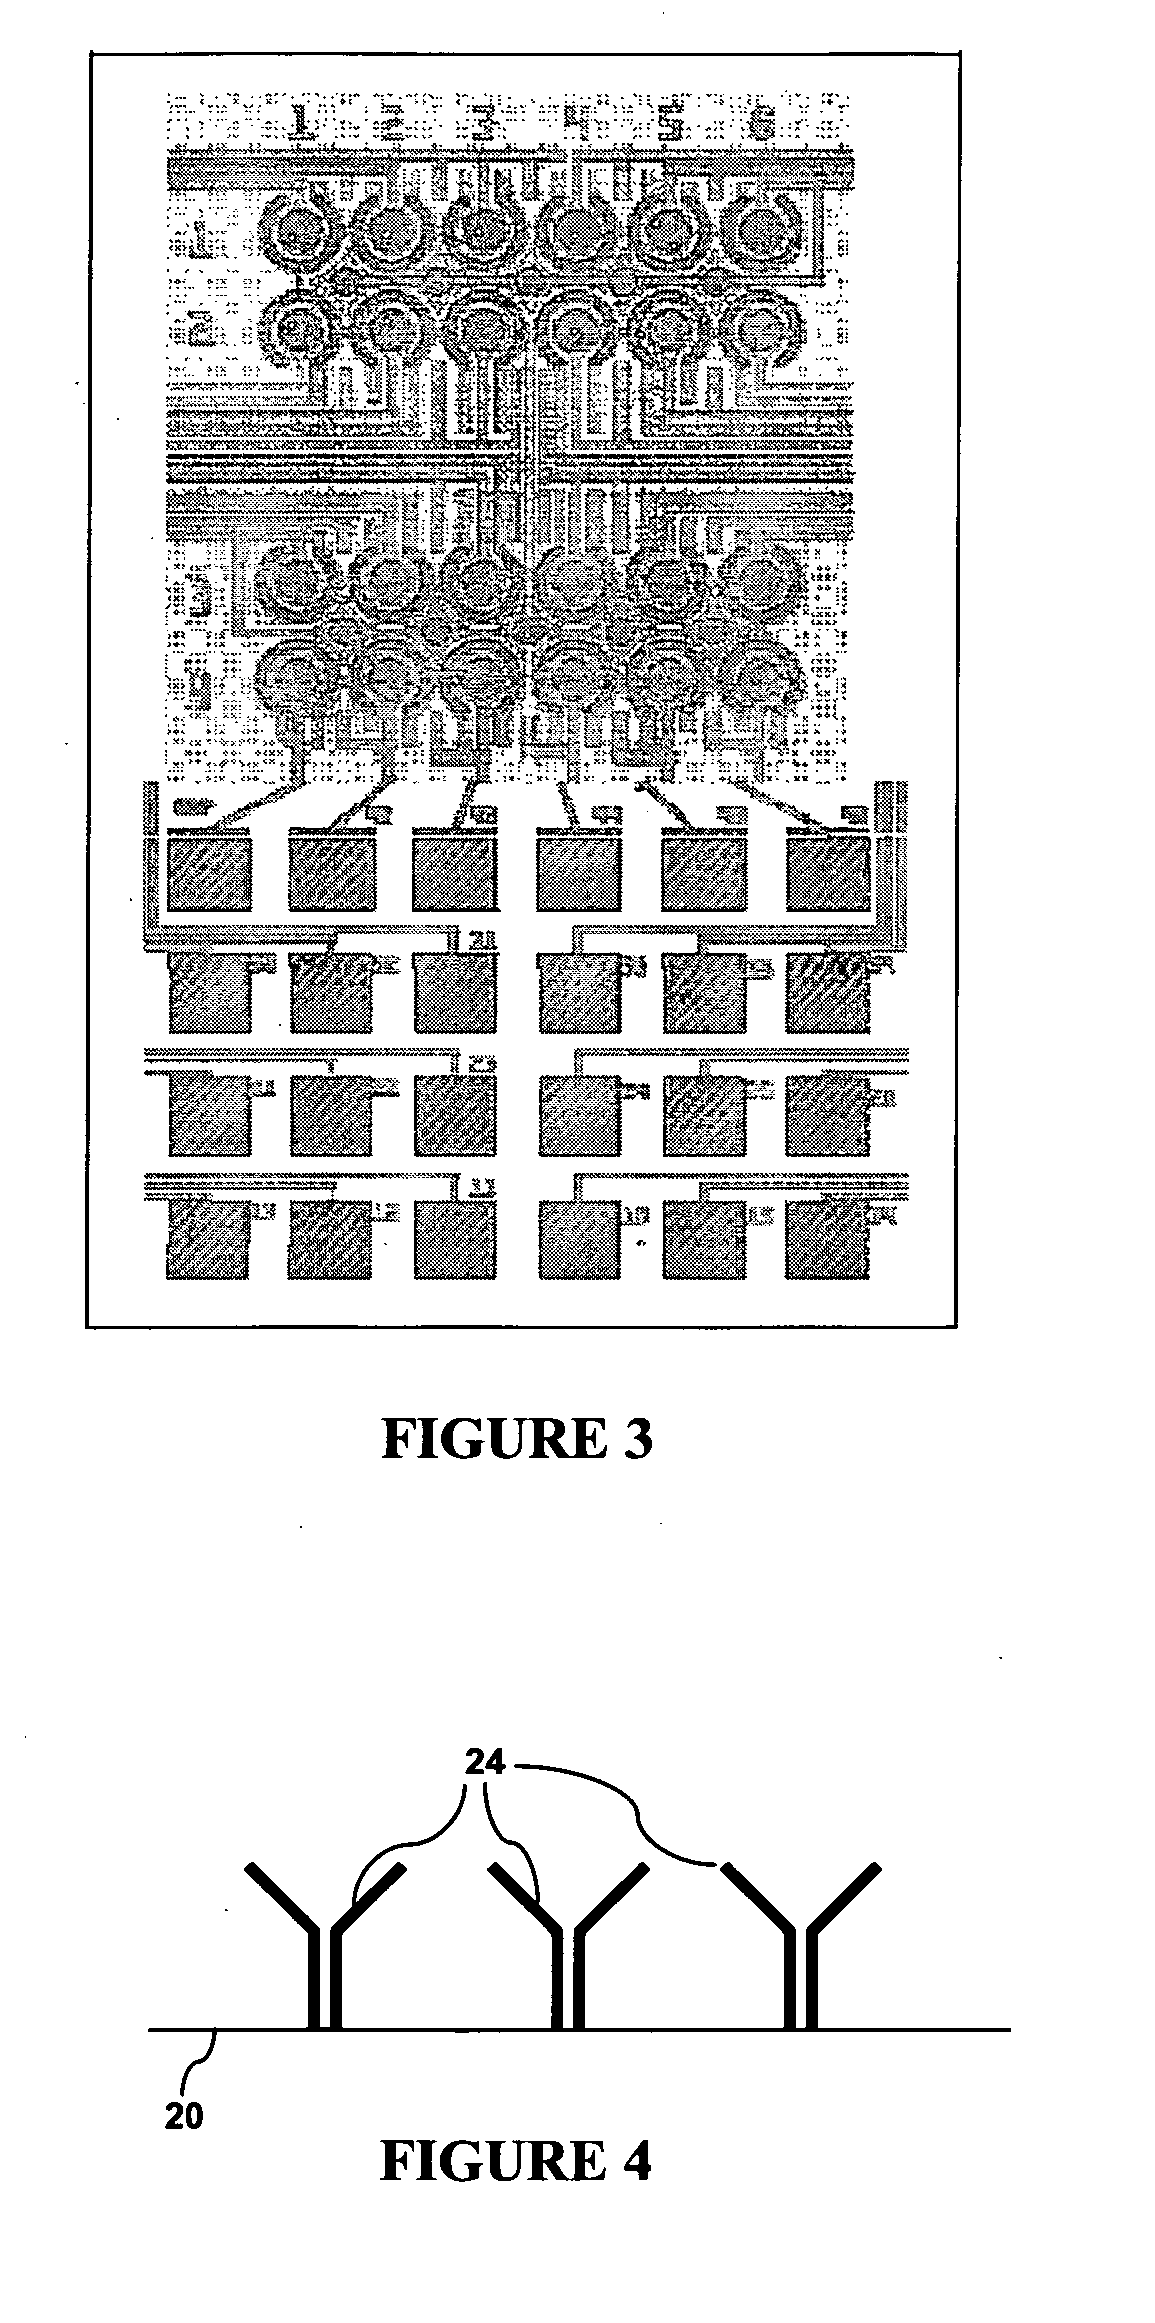 Device and method for detection of analyte from a sample